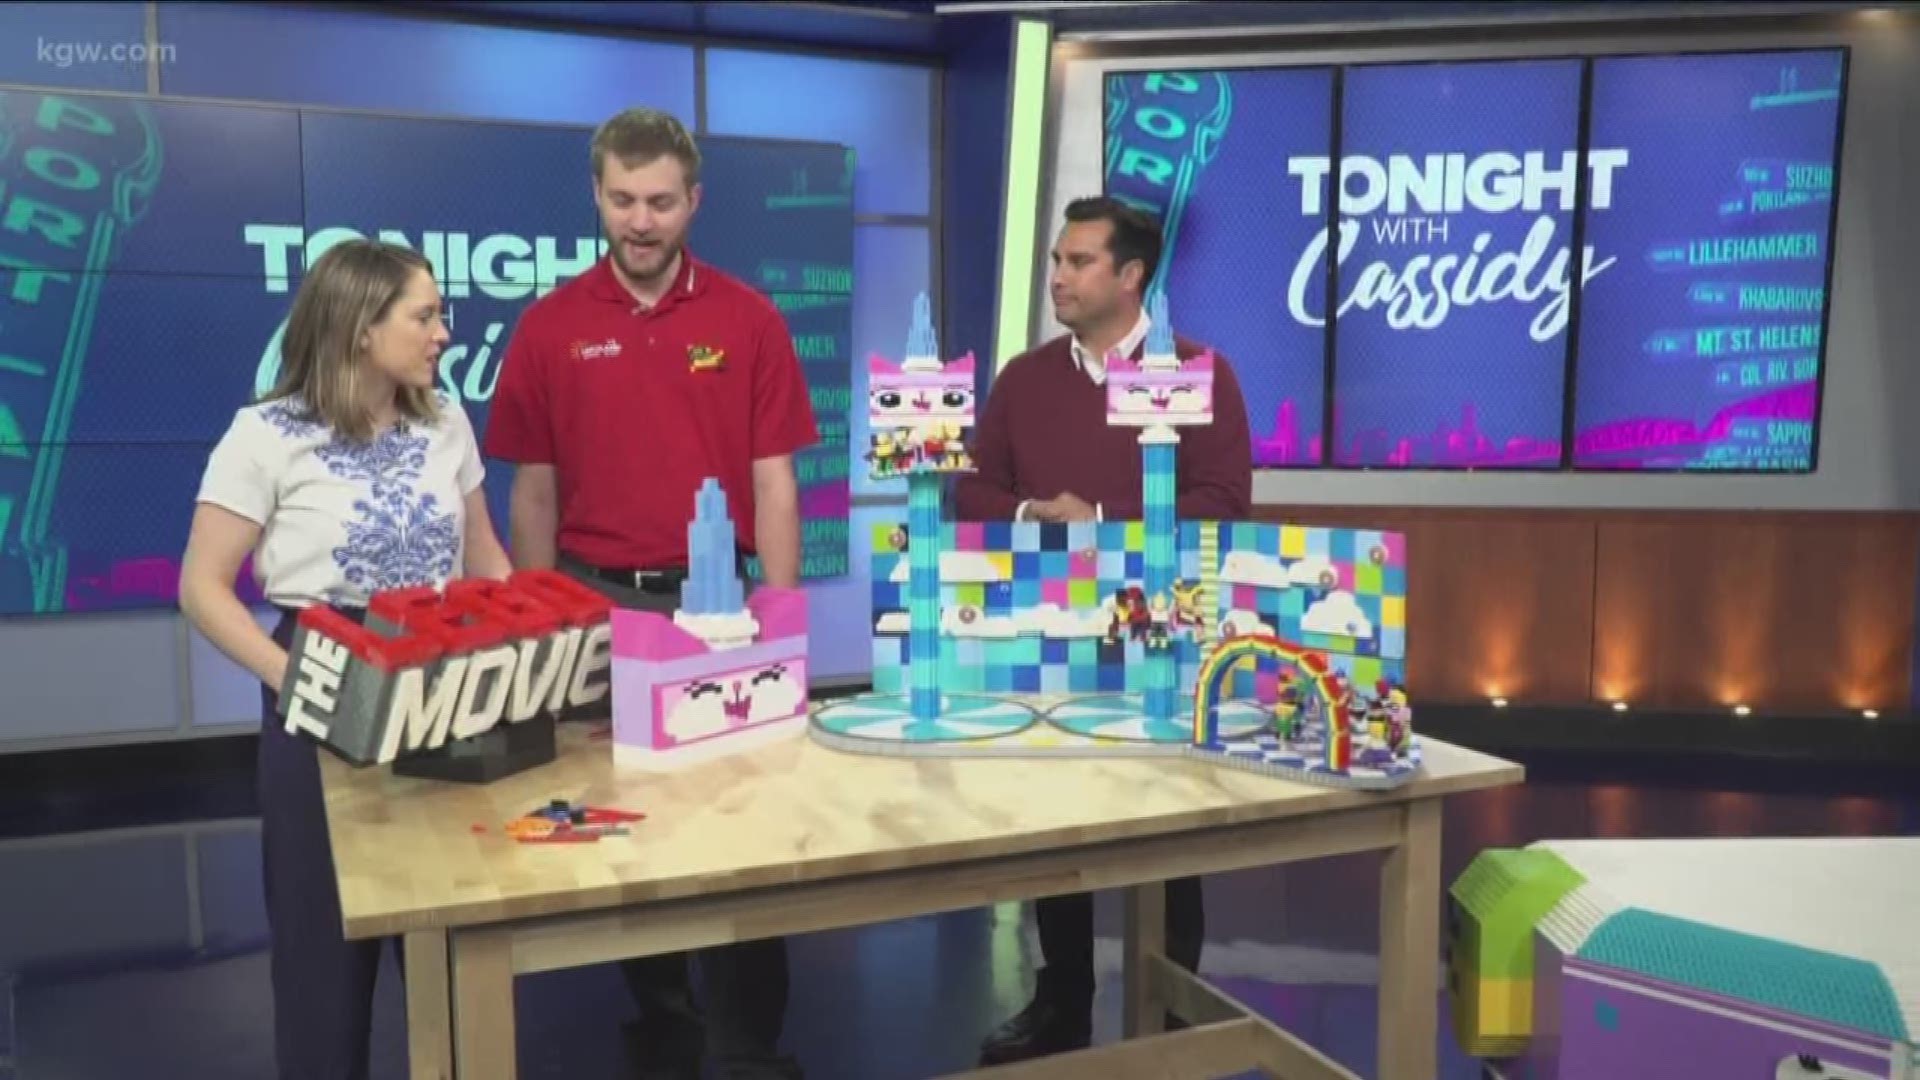 A master Lego builder stops by to show off designs that will be at The Lego Movie World this spring in California.
legoland.com
#TonightwithCassidy